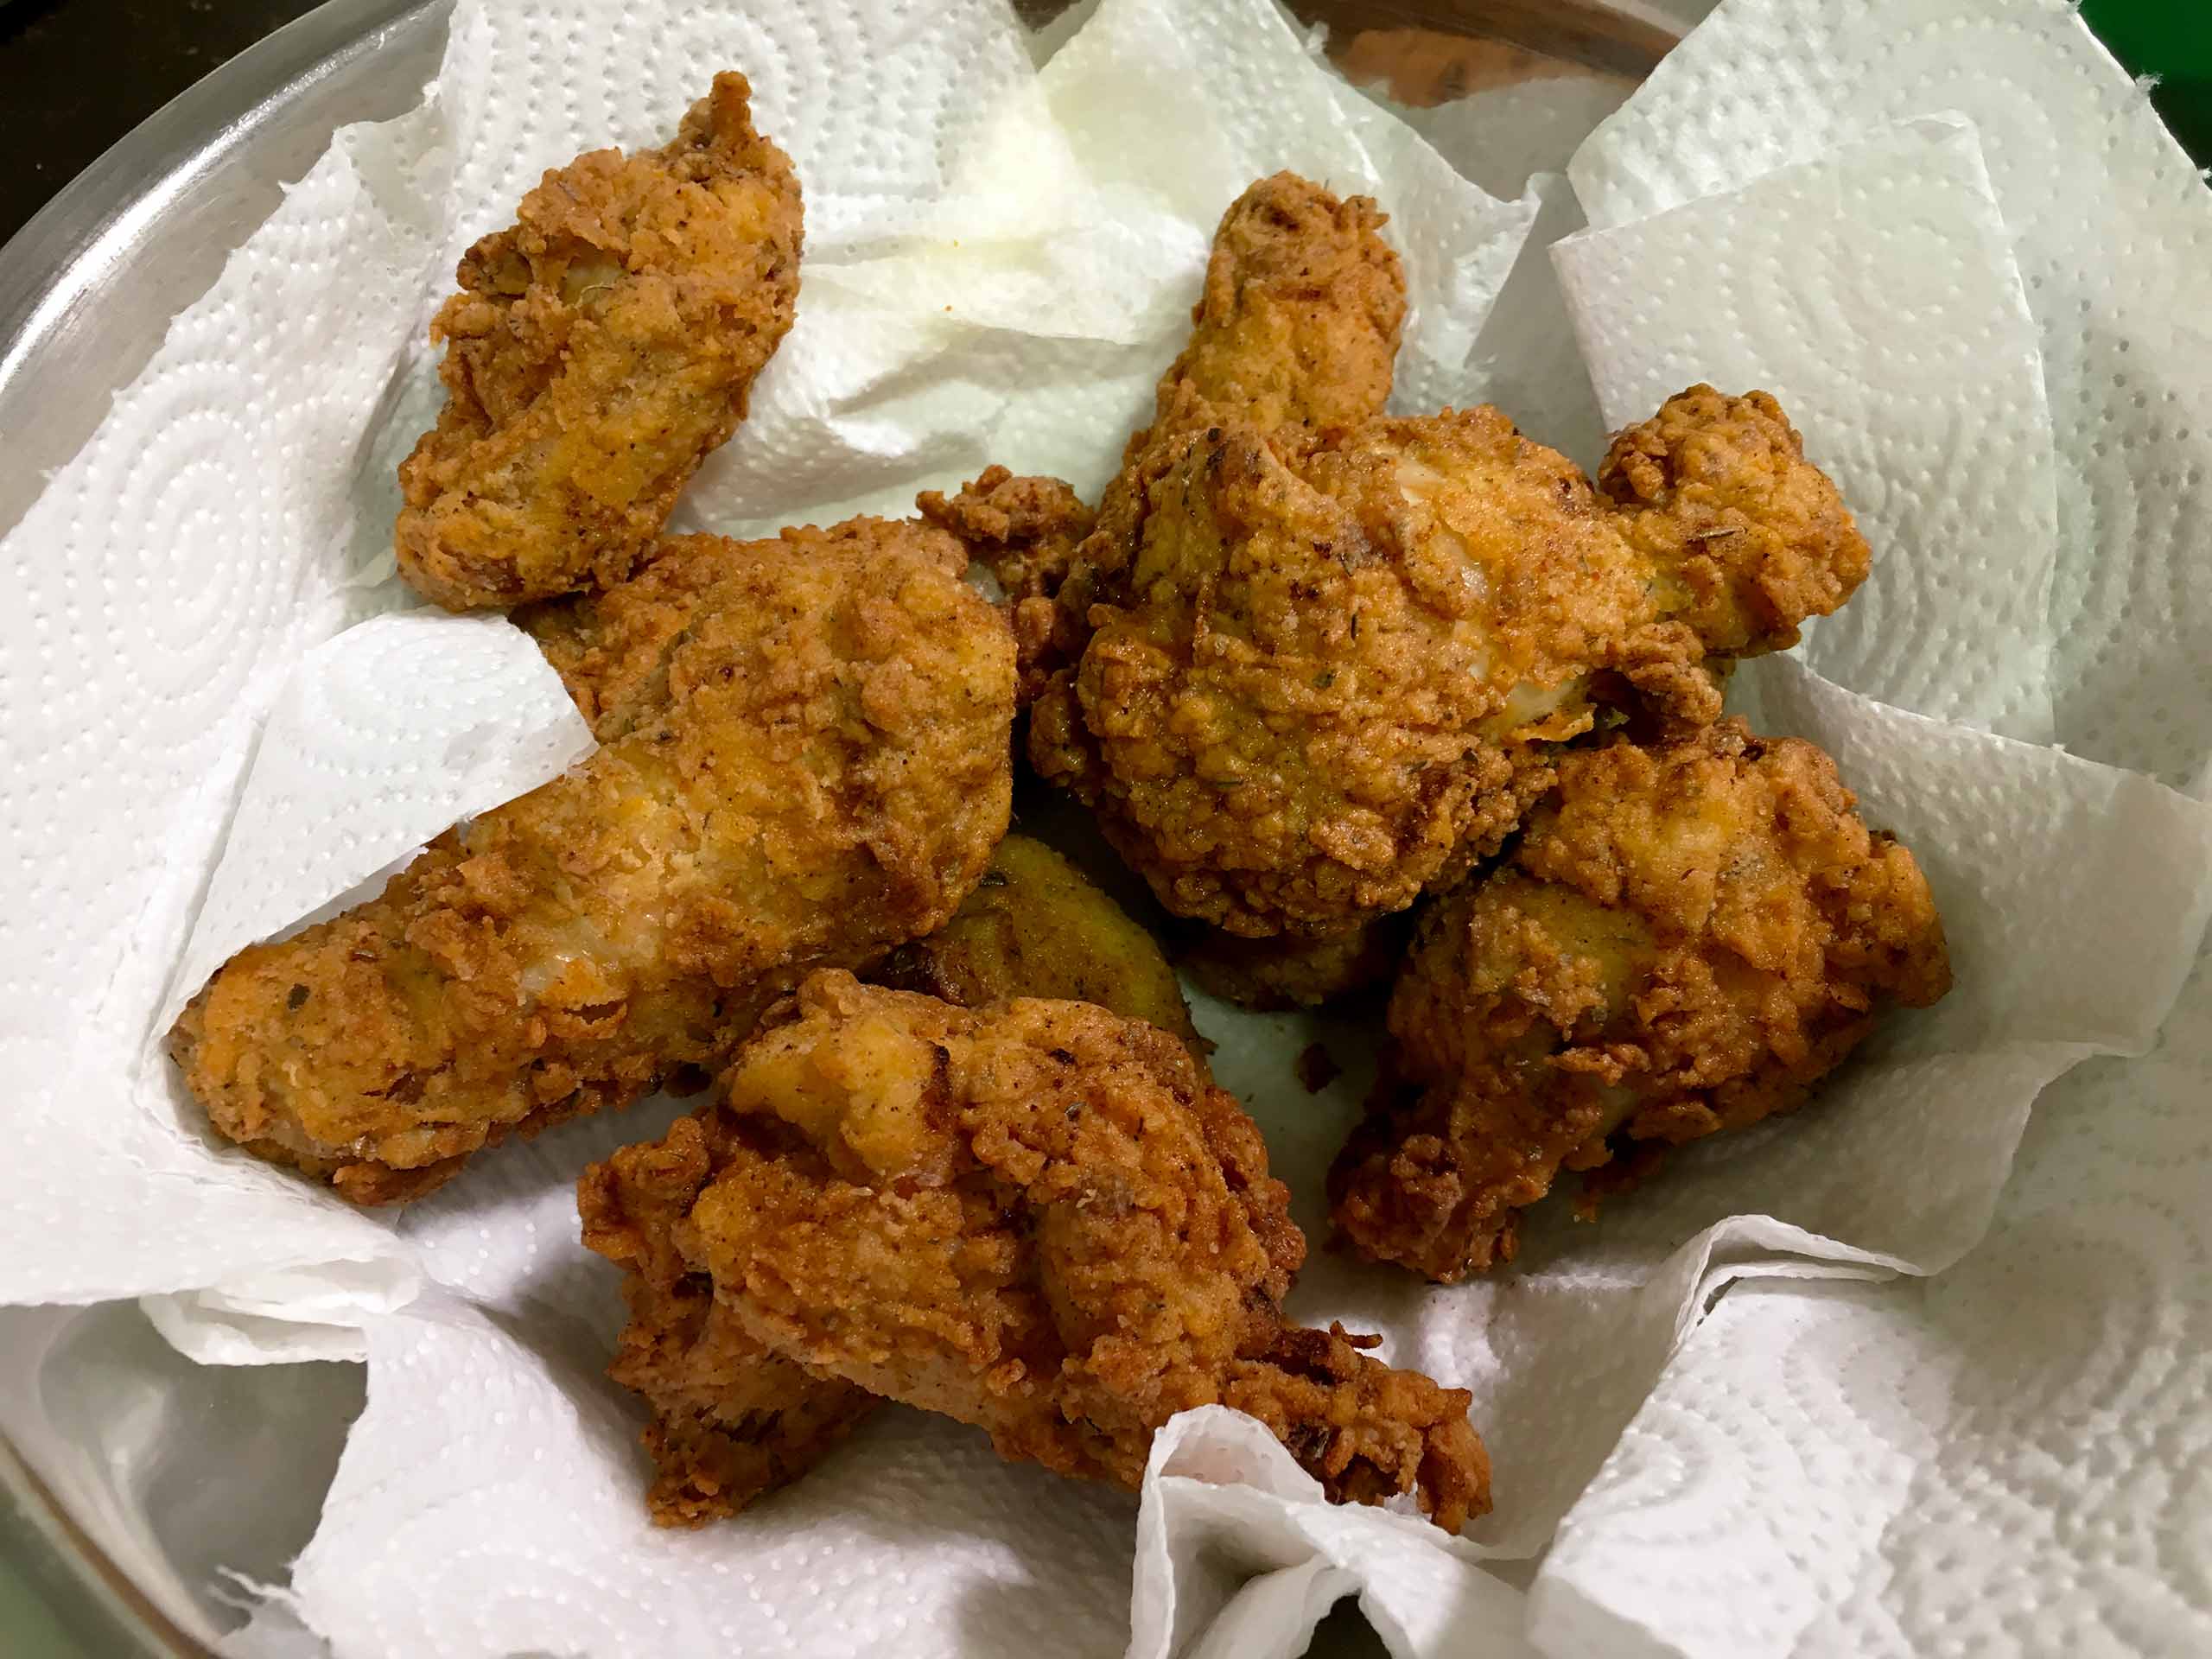 KFC style chicken wings cooling